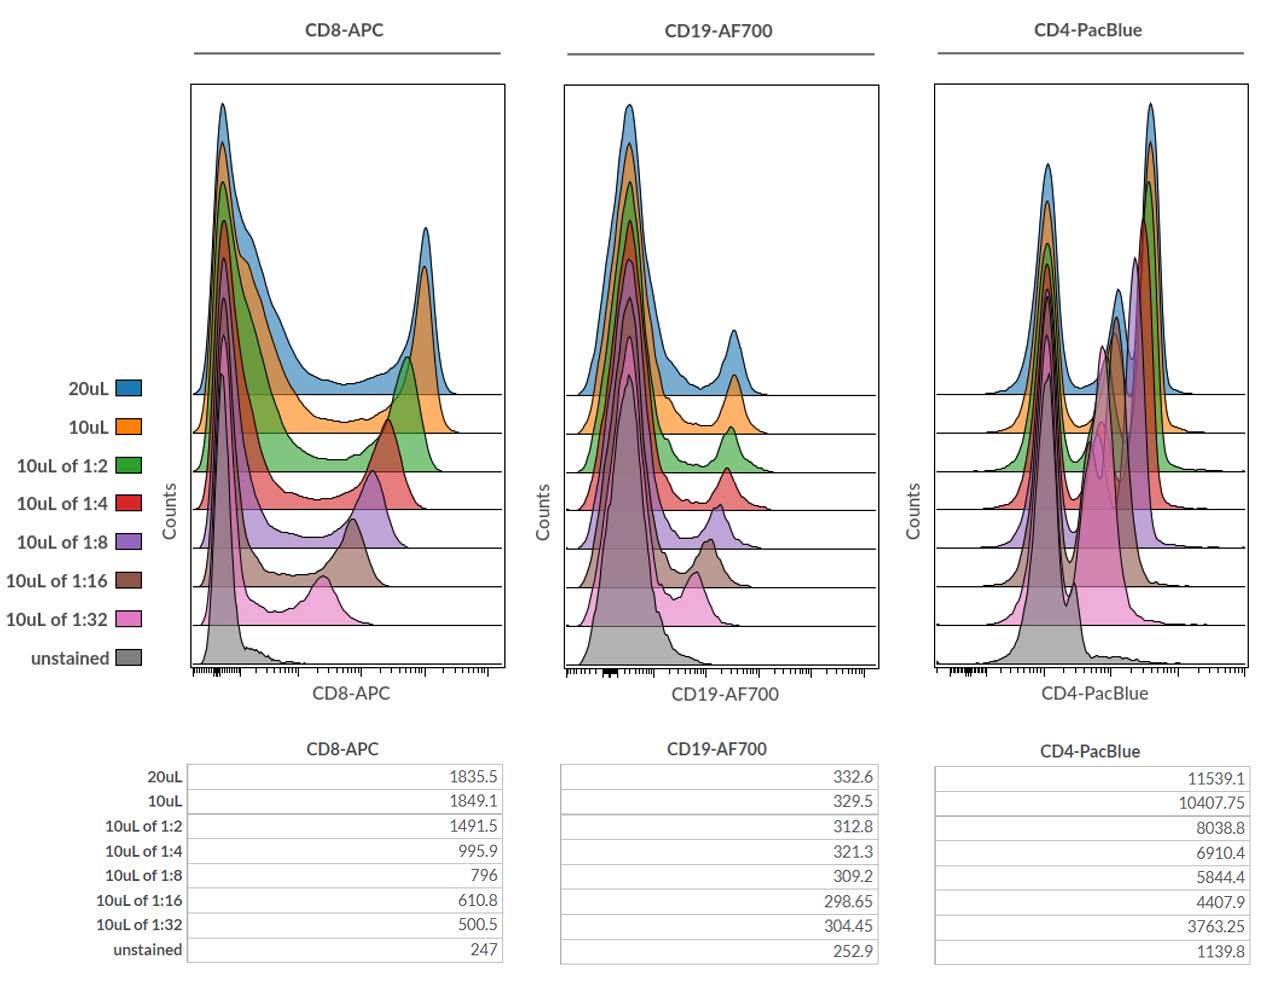 Figure 7. Overlay of single parameter histogram plots for CD8-APC, CD19-AF700 and CD4-Pacific Blue antibody titrations with actual Median Fluorescence Intensities for each antibody titration displayed below